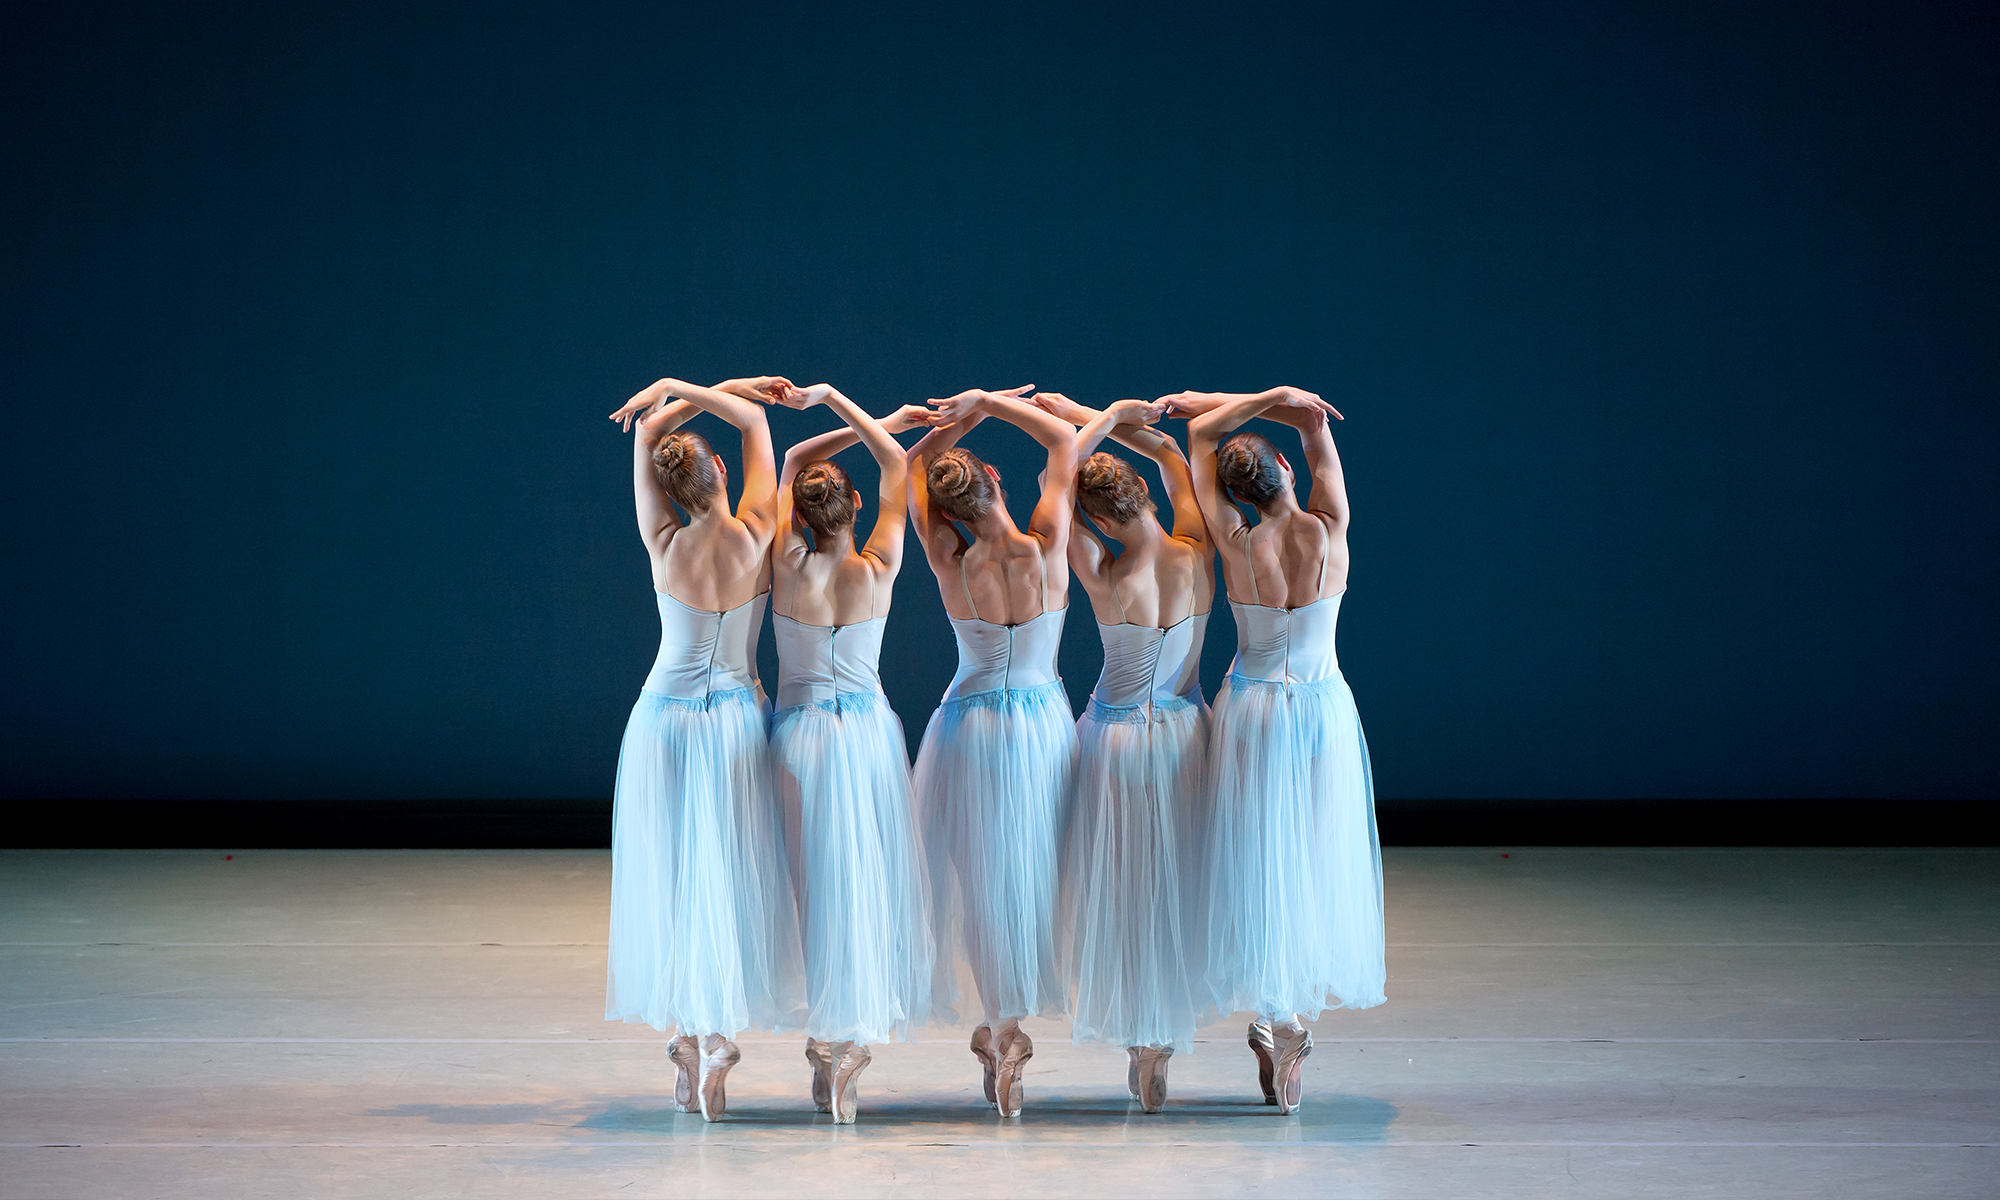 Five dancers wearing light blue tulle dresses raising their arms up